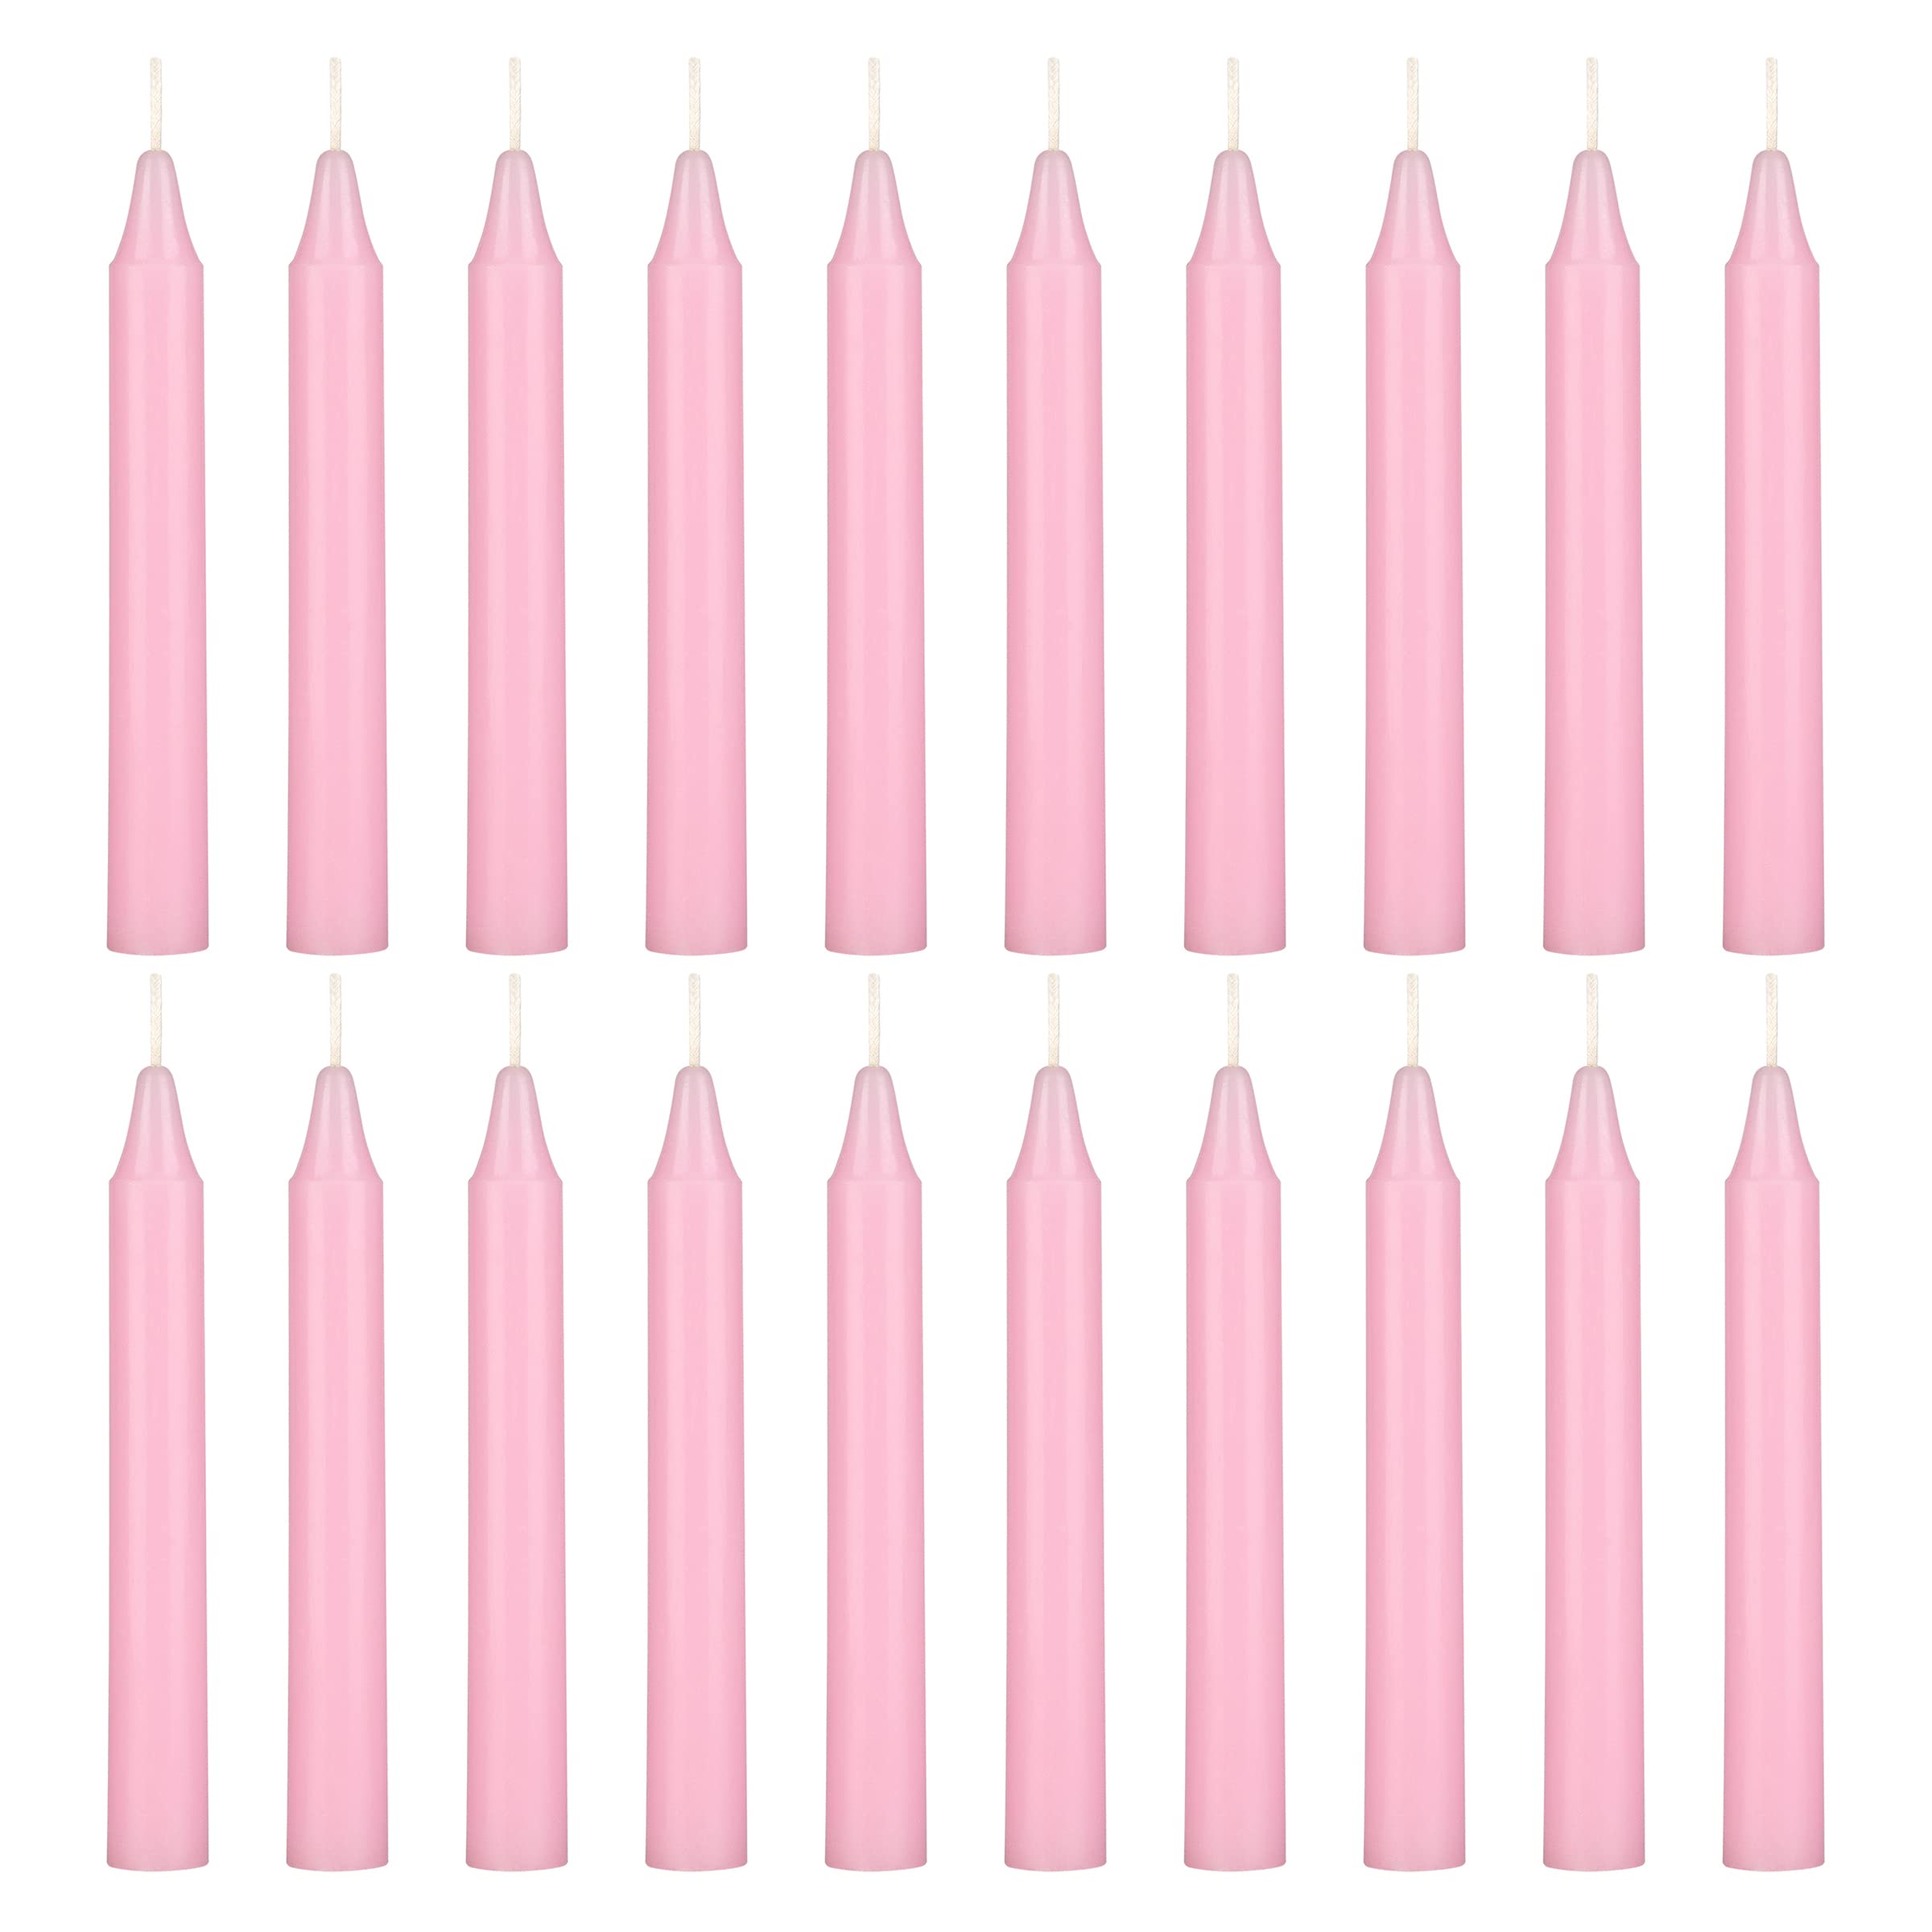 Mega Candles - Unscented 10cm Mini Chime Ritual Spell Taper Candle - Pink S